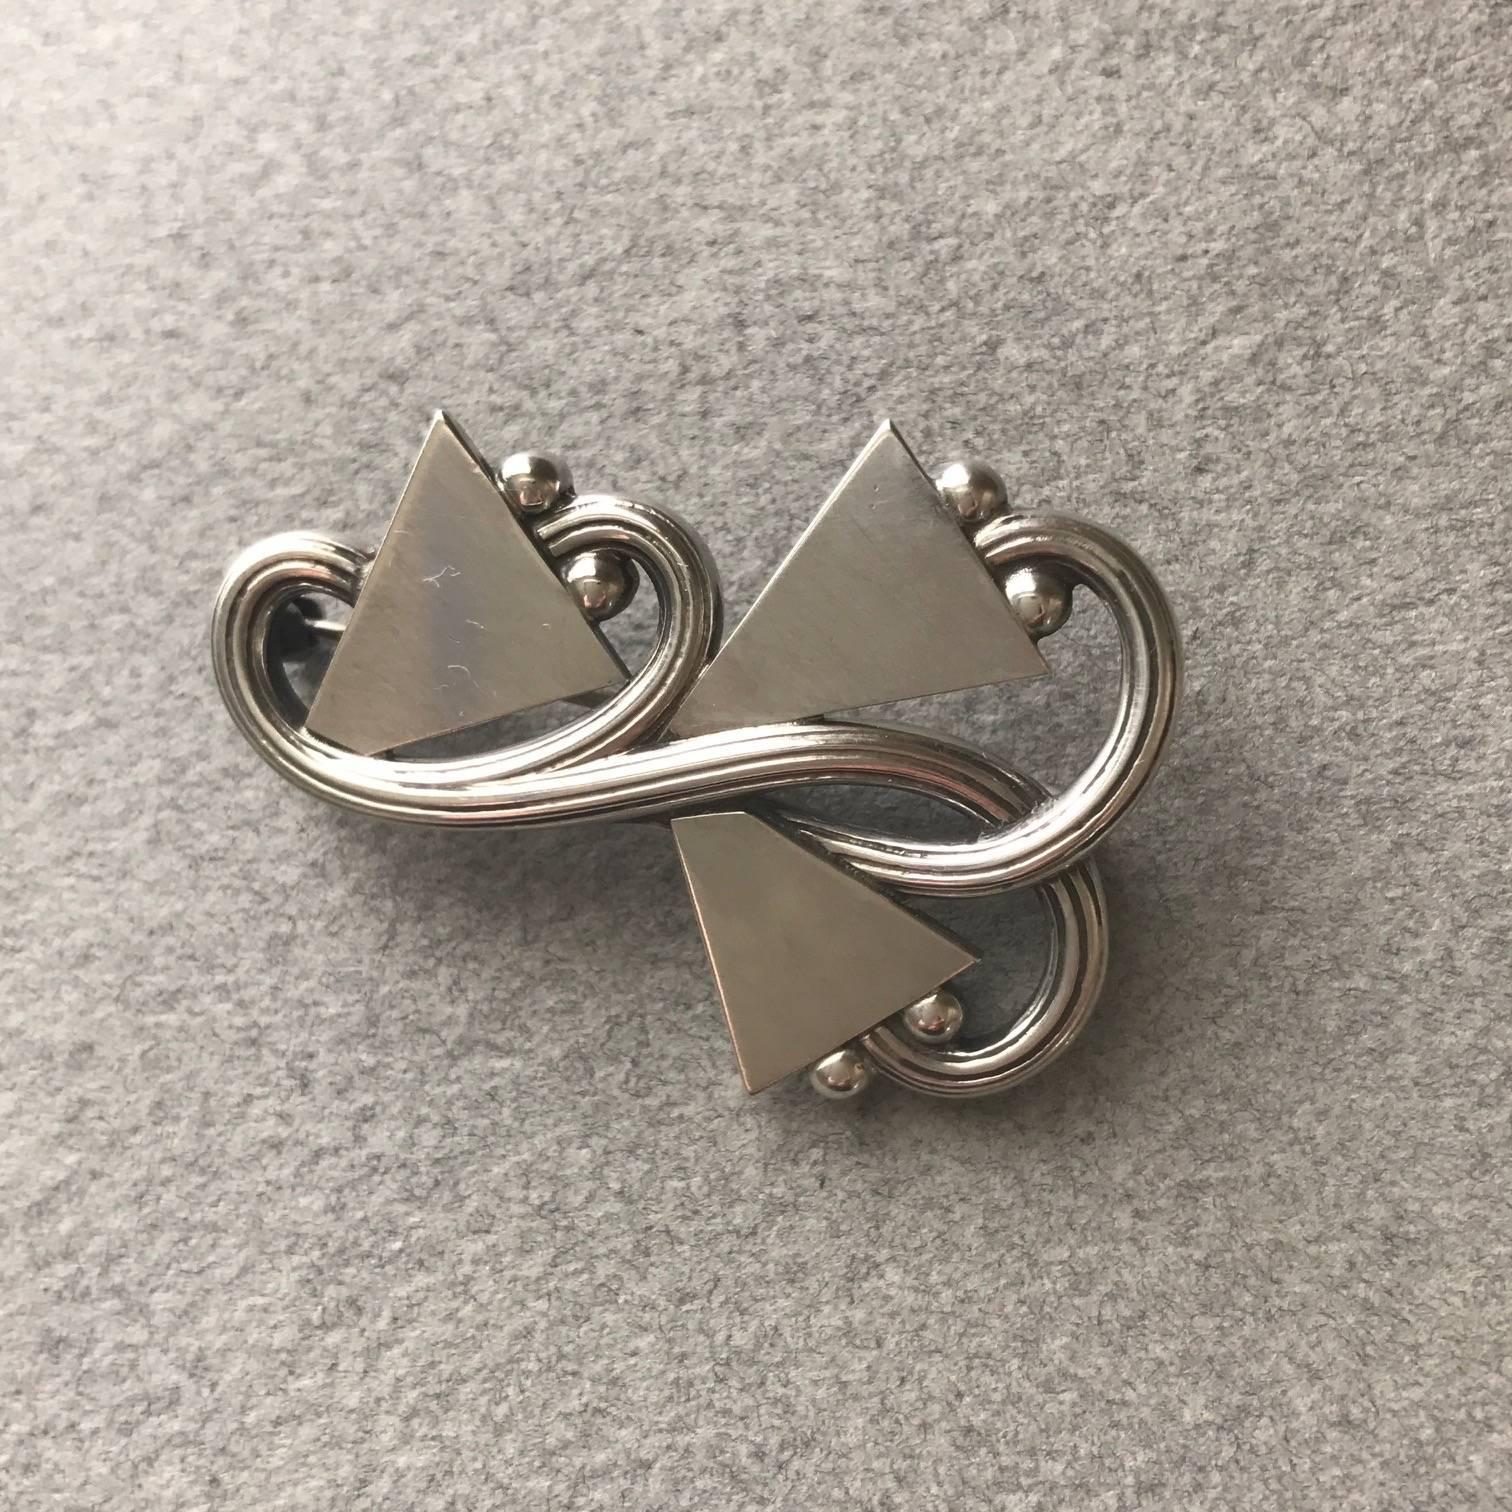 Georg Jensen Sterling Silver Brooch, No. 308

Unusual and hard to find, modernist piece by Georg Jensen's son, Jorgen Jensen.

First produced in 1953, out of production by the 1970's. An example is held in the collection of the British Museum.

An